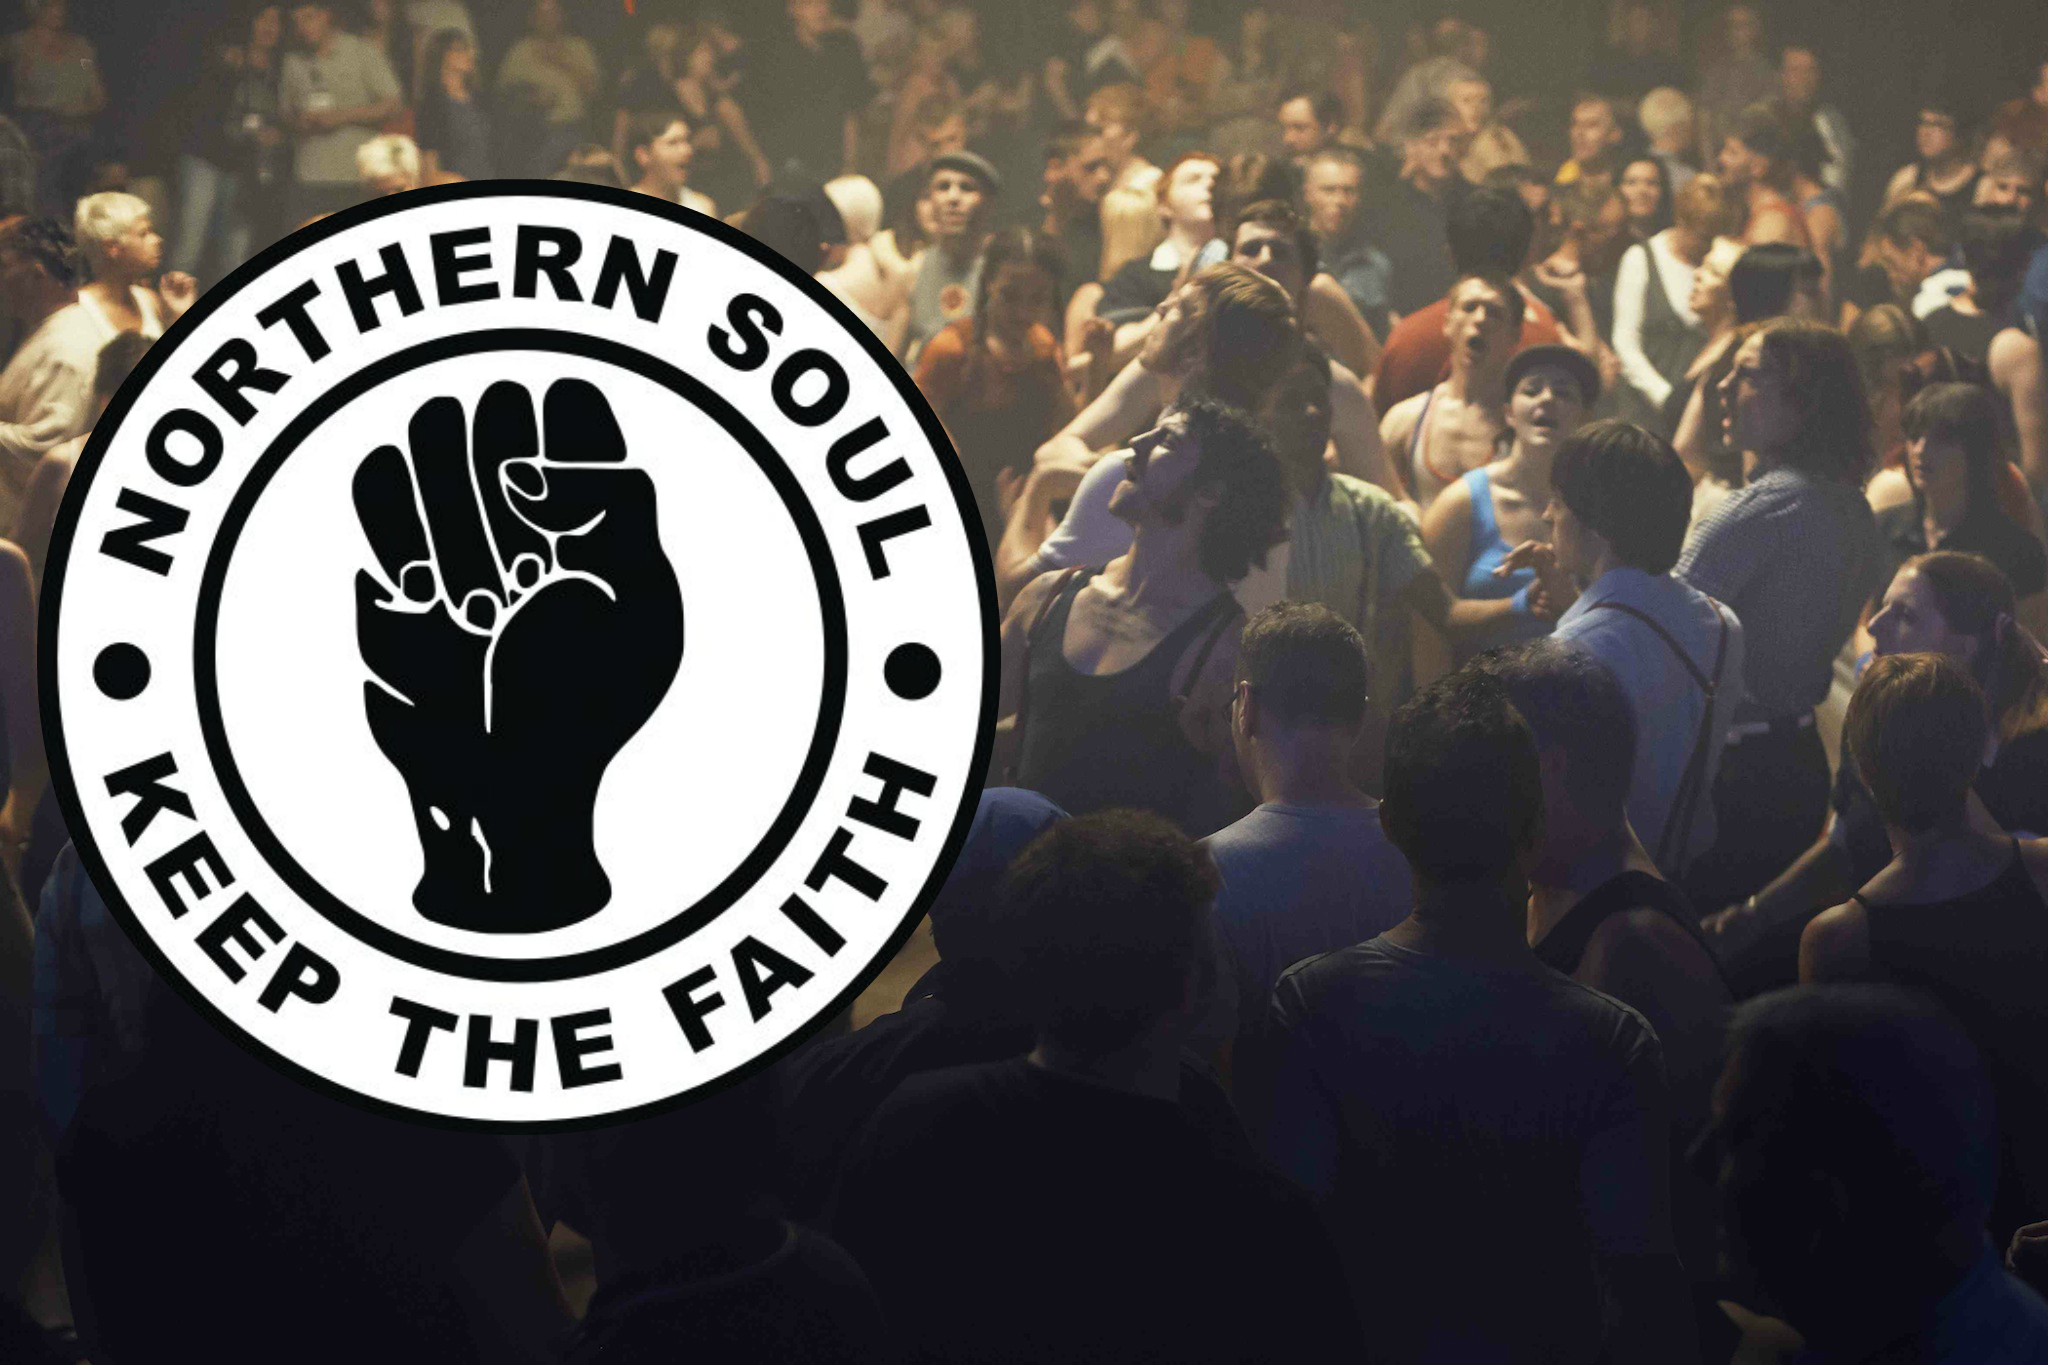 A guide to northern soul